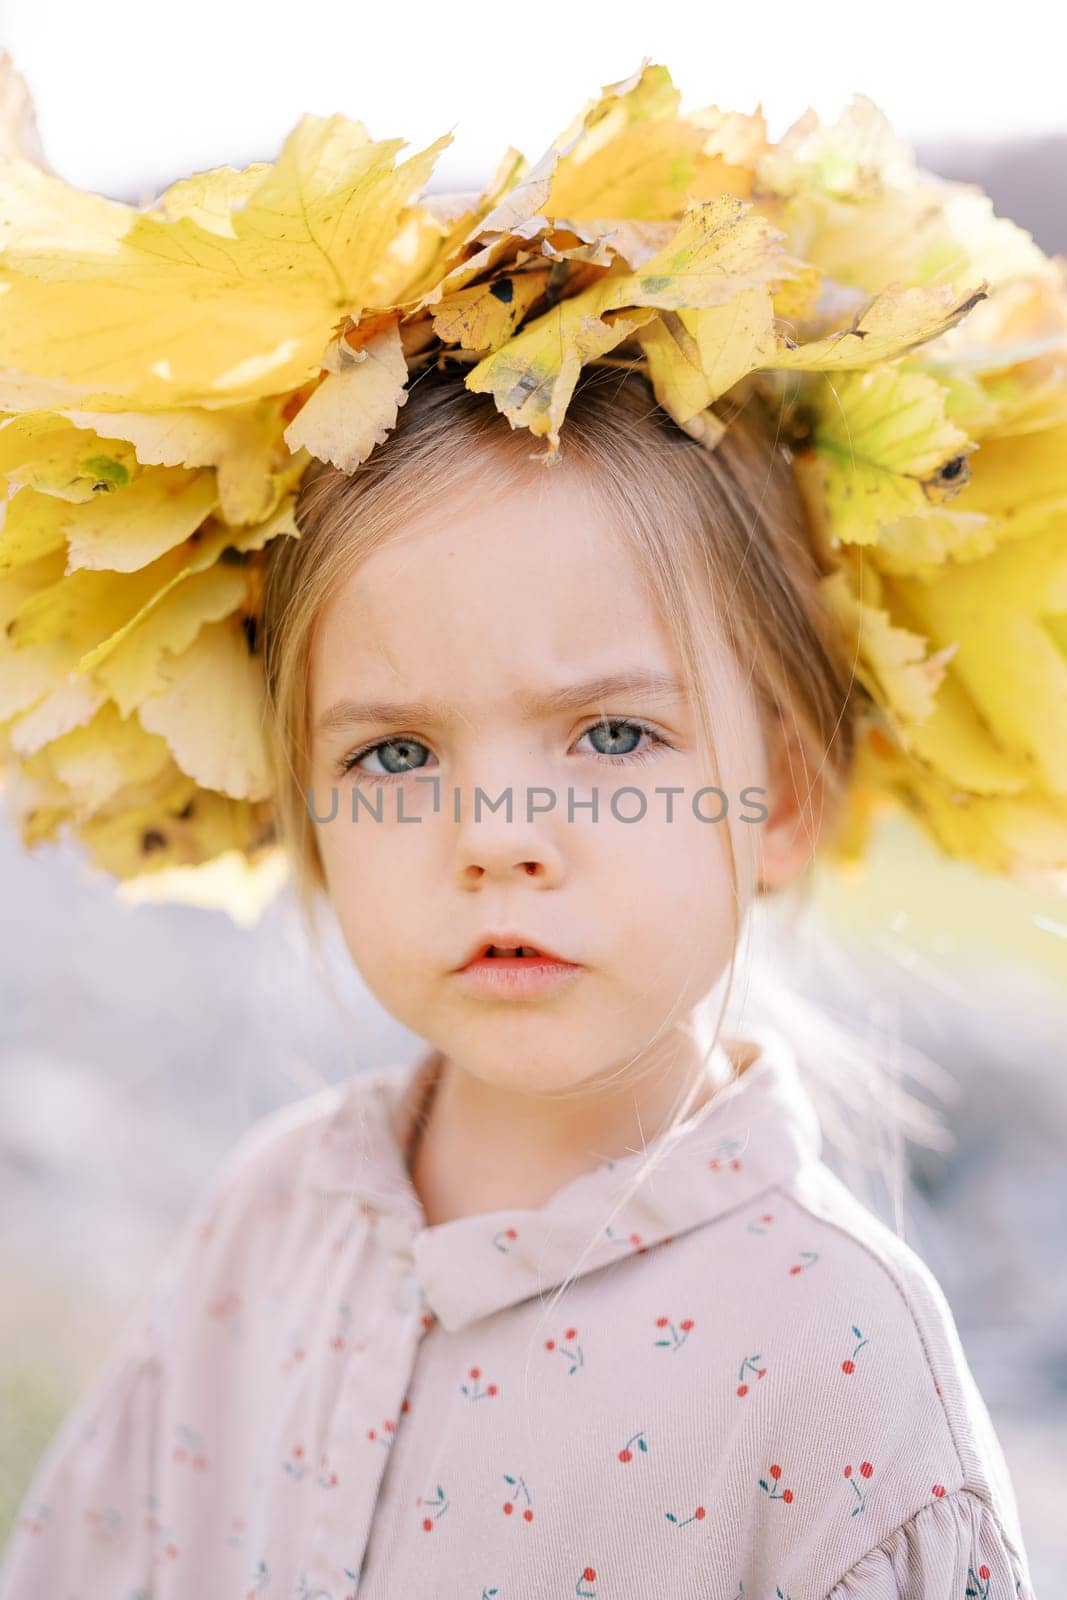 Little serious girl wearing a crown of yellow leaves. Portrait. High quality photo